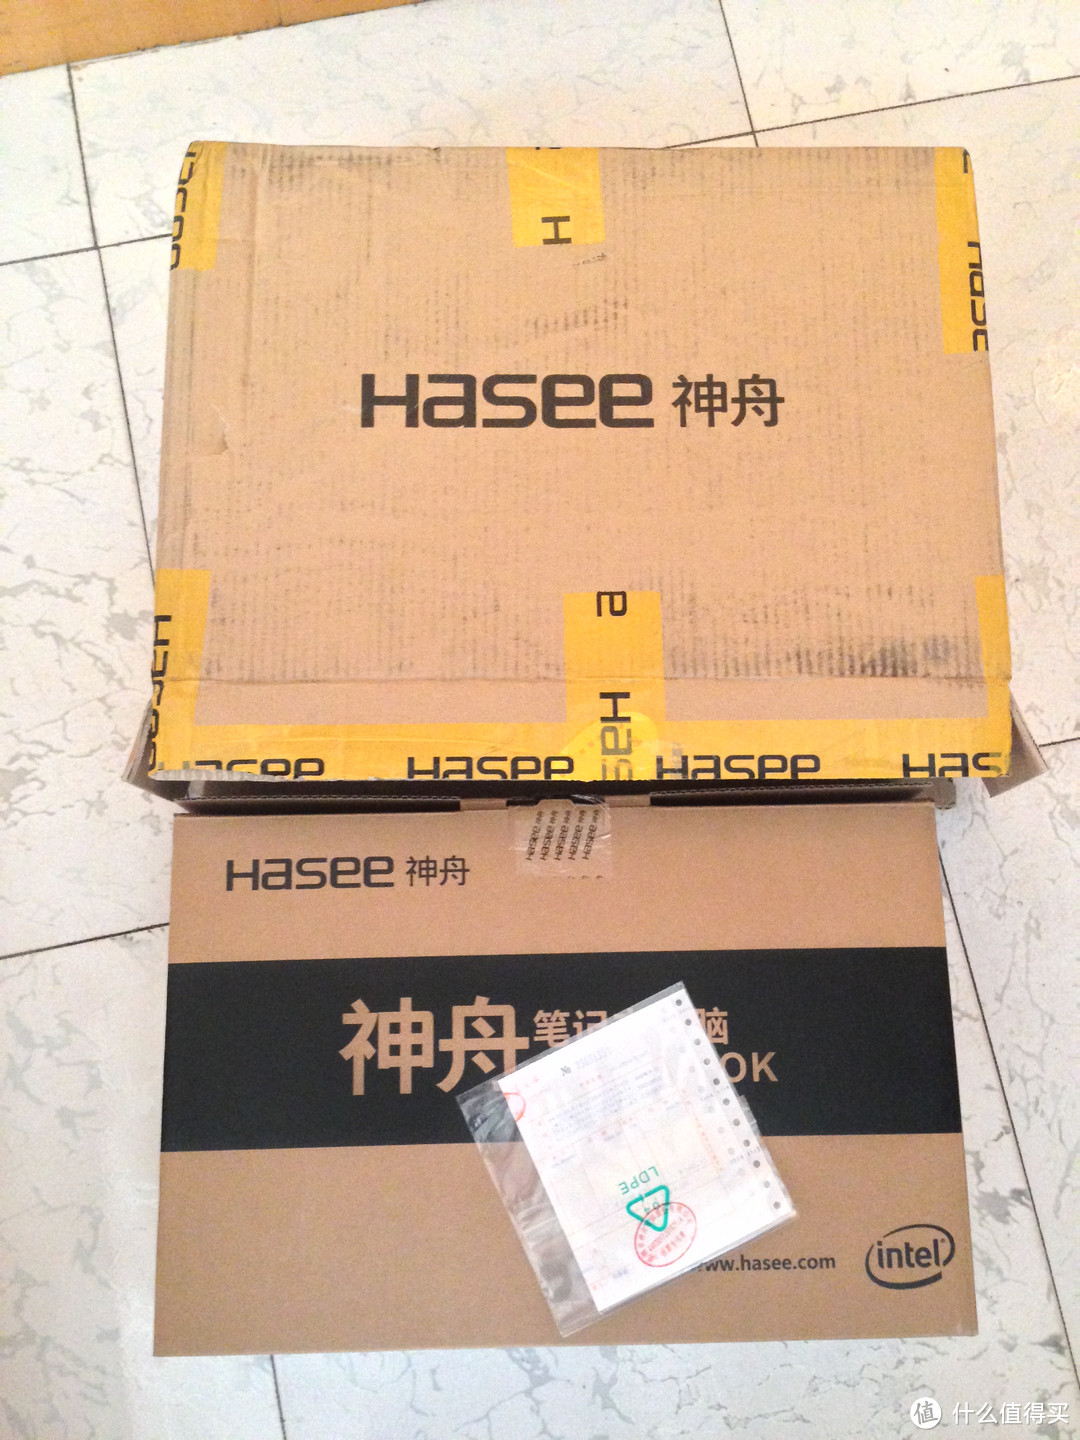 HASEE 神舟 战神 K610C-i5D1 15.6寸笔记本电脑